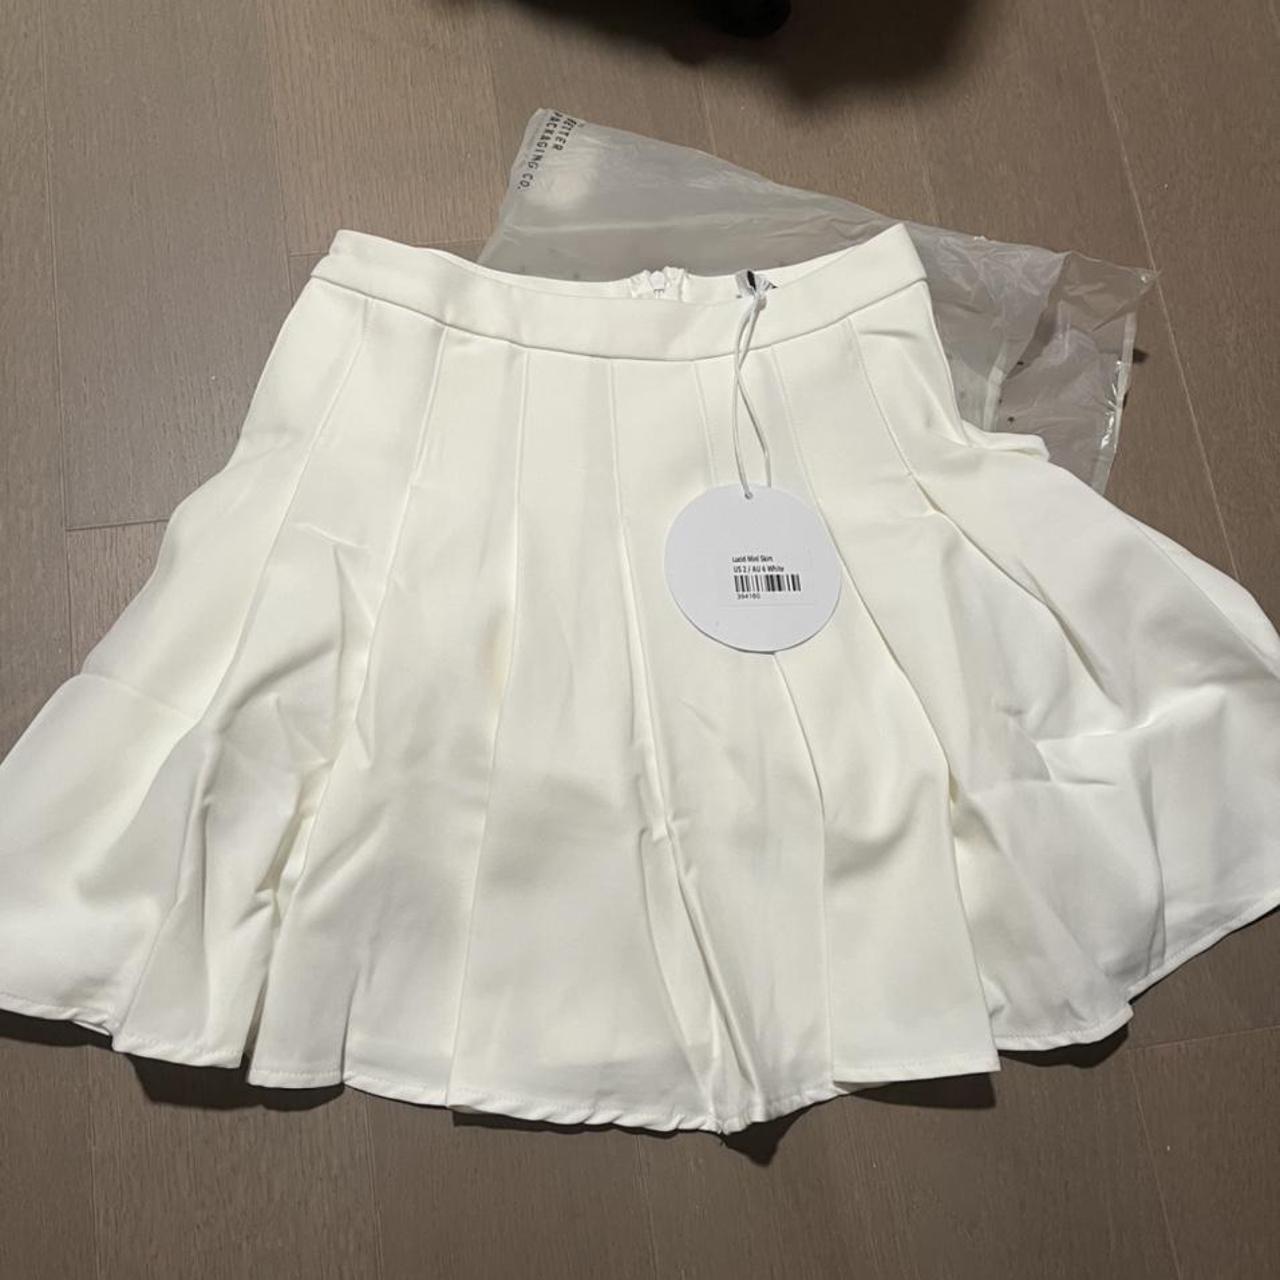 Princess Polly Lucid Mini Skirt in size US 2 in - Depop